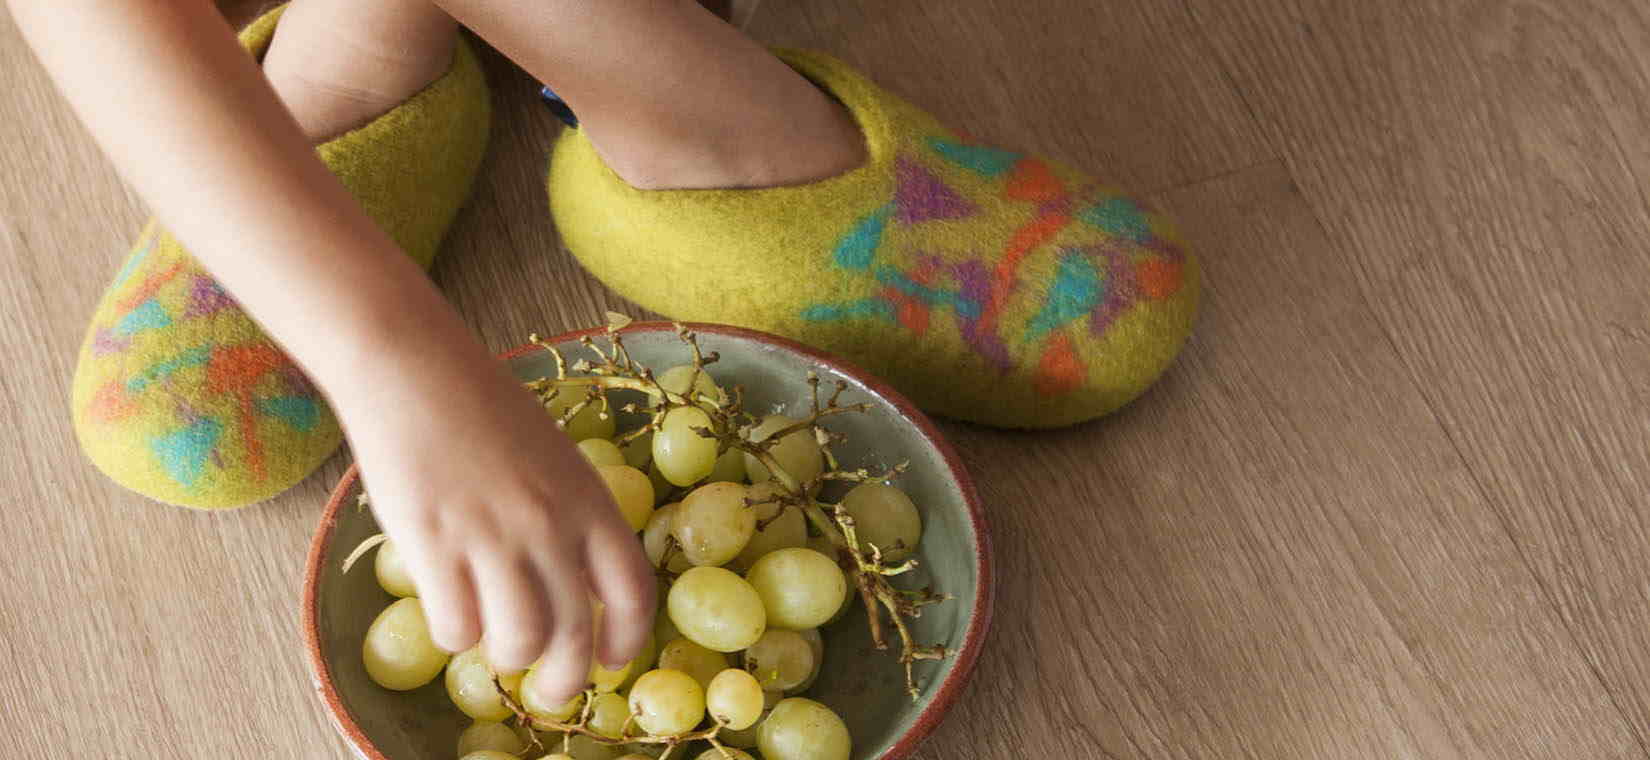 Child eating grapes and wearing a pair of wool slippers with Confetti Bits decoration by Wooppers